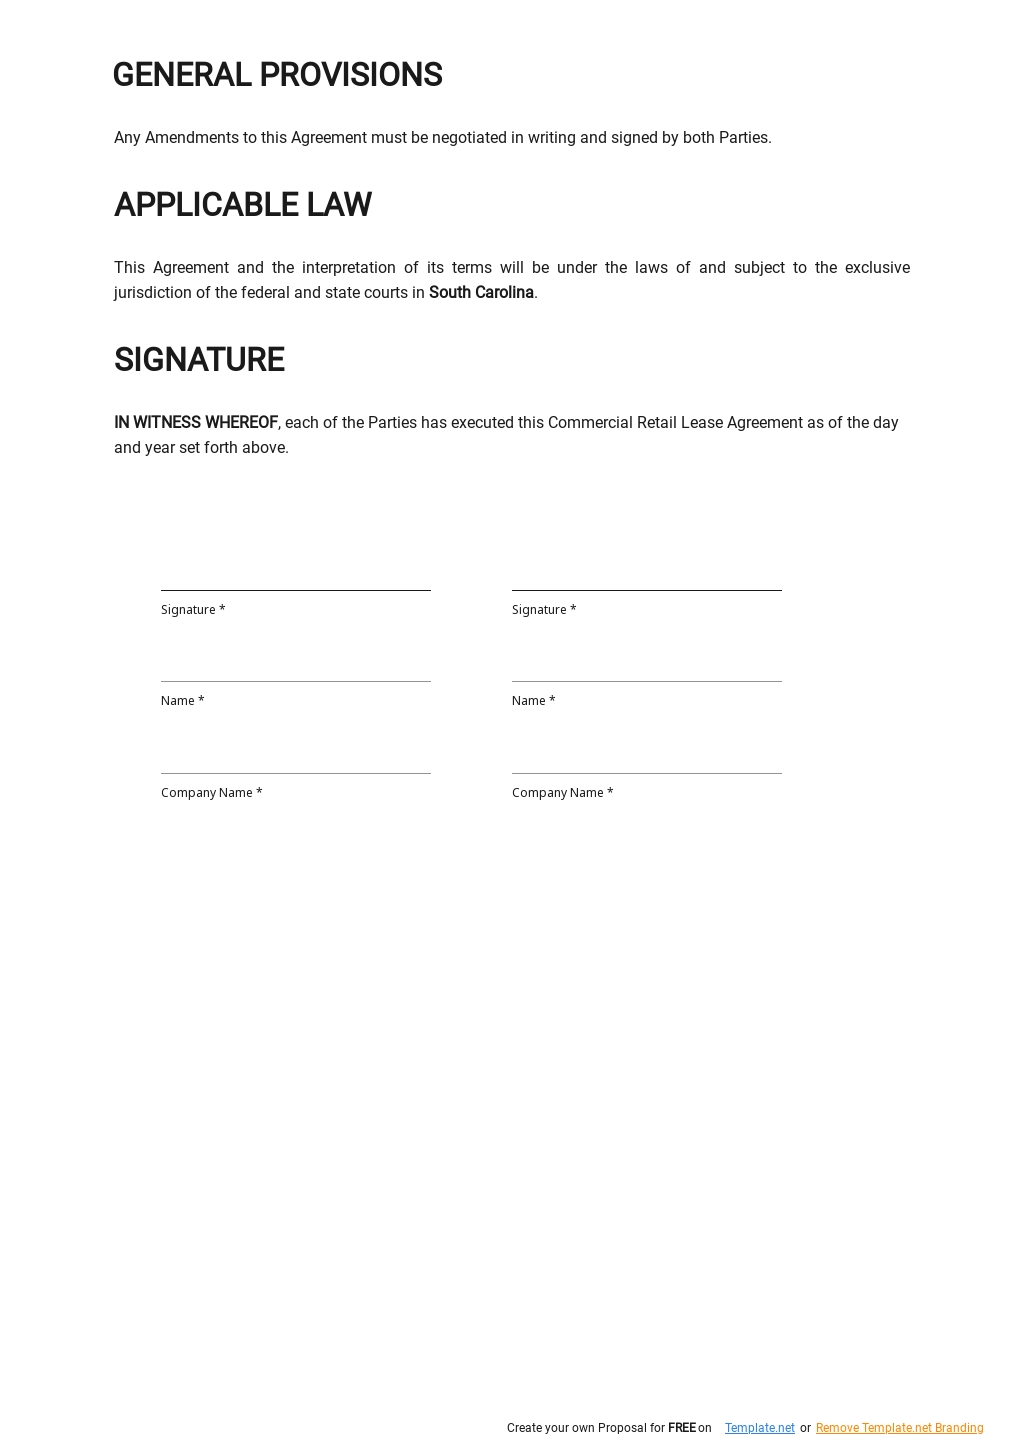 Commercial Retail Lease Agreement Template 2.jpe